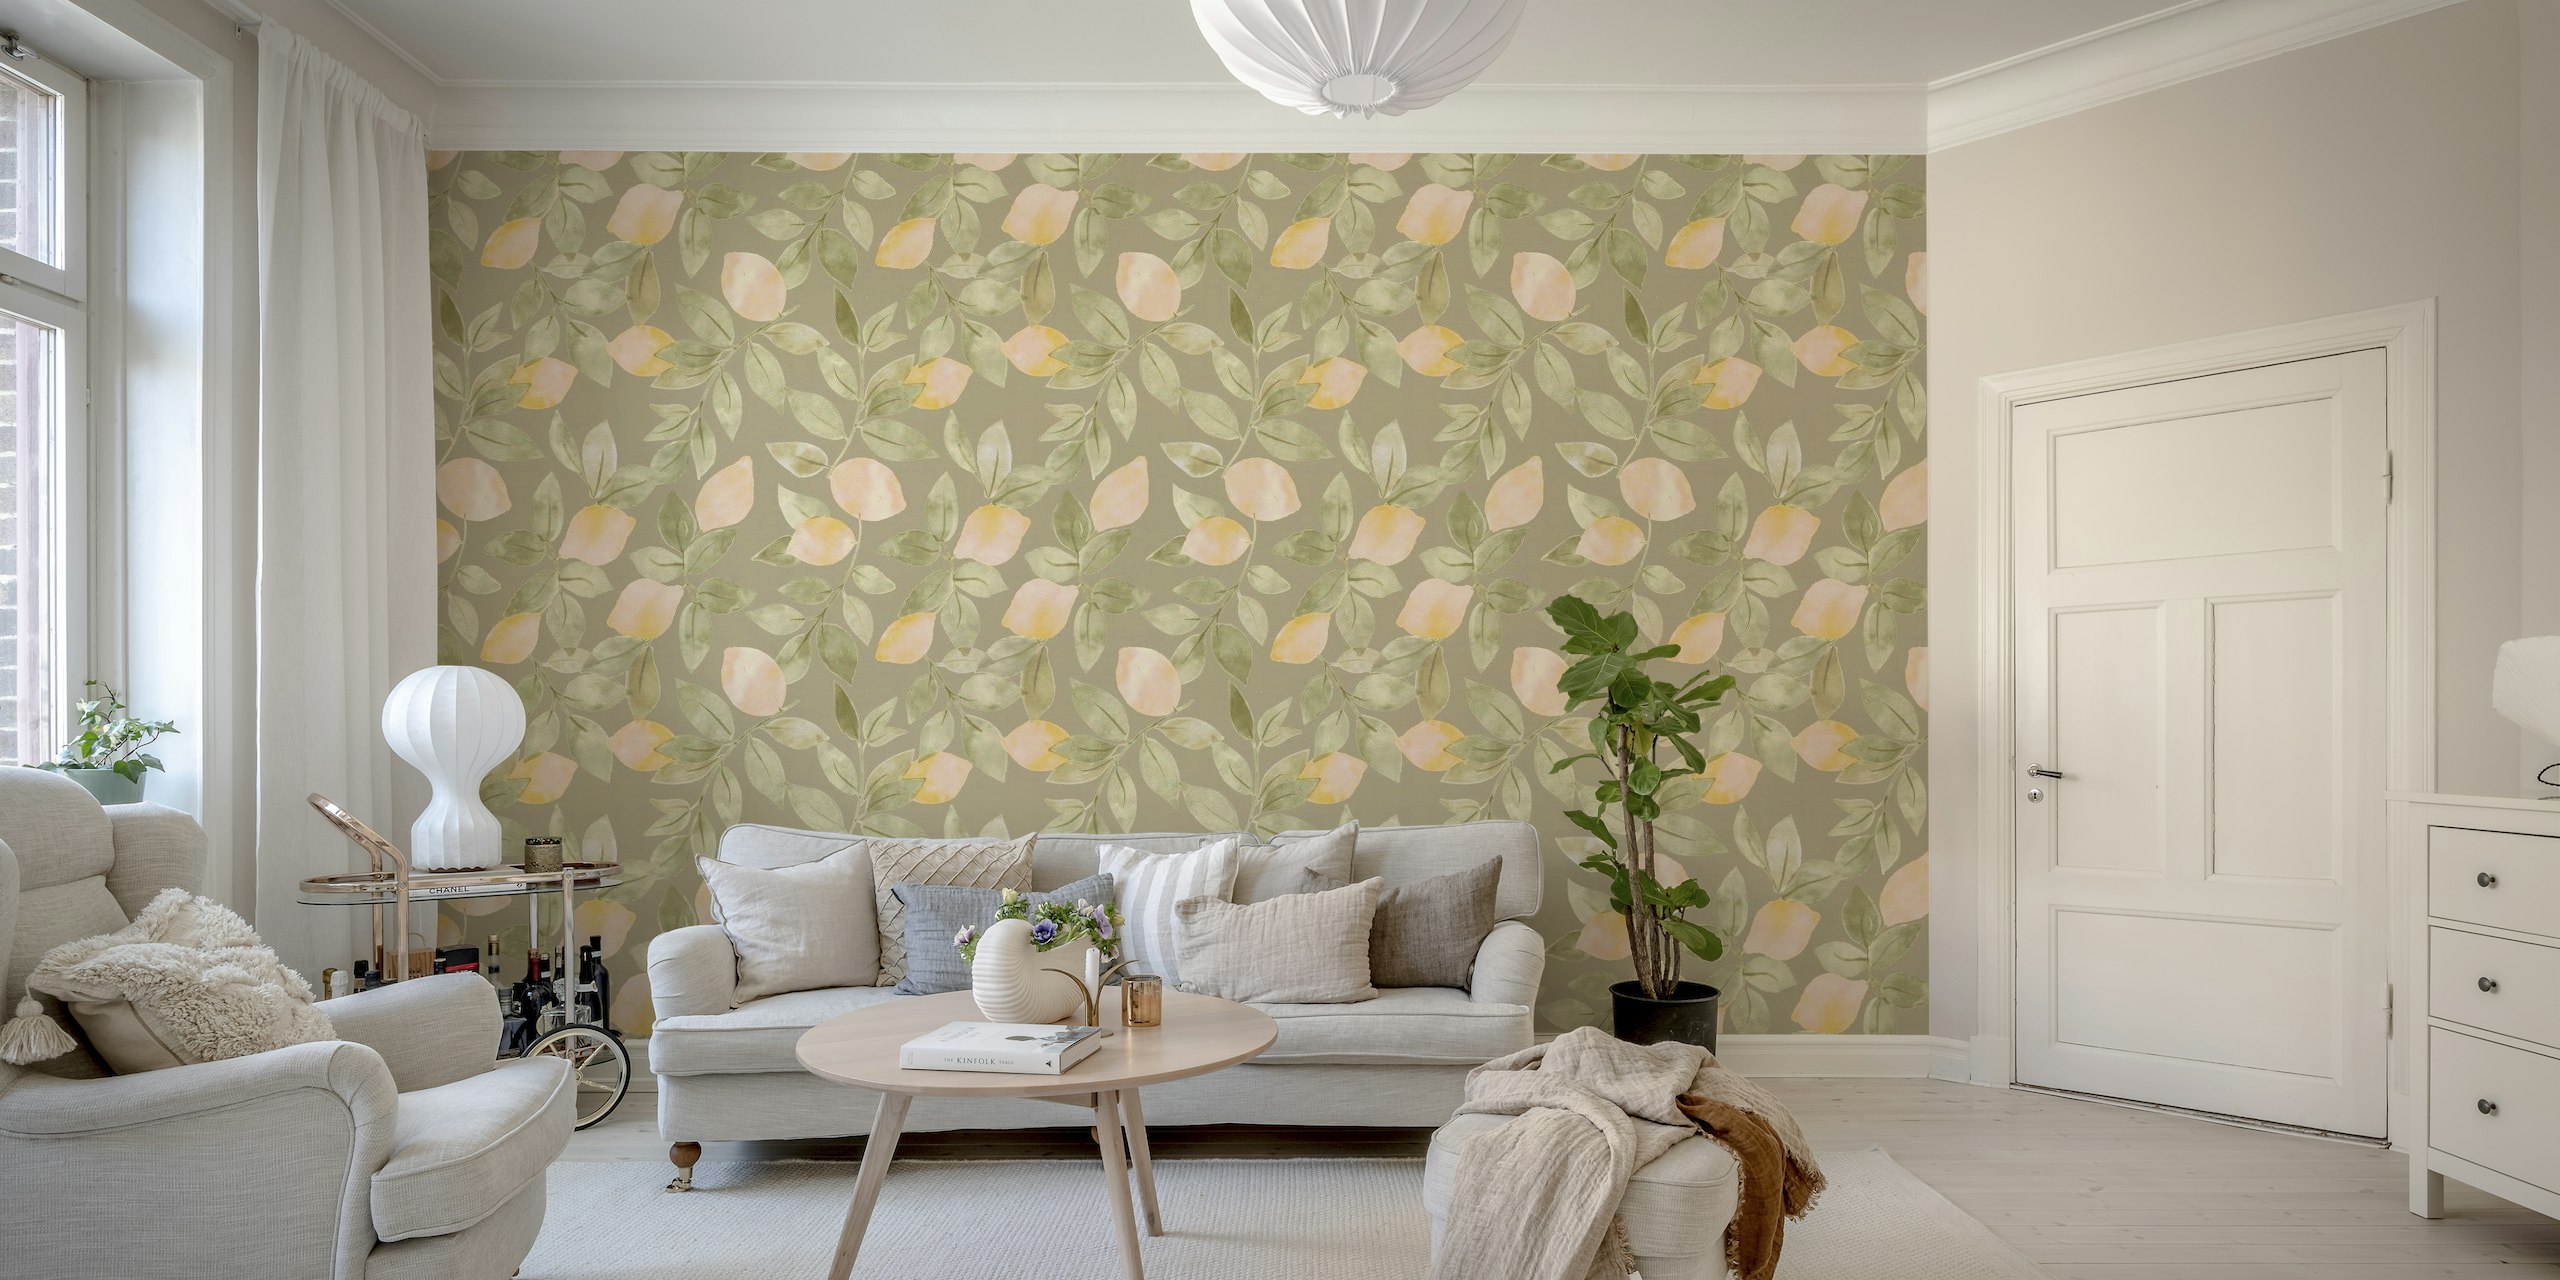 Hand-painted lemon and foliage wall mural on greenish-taupe background